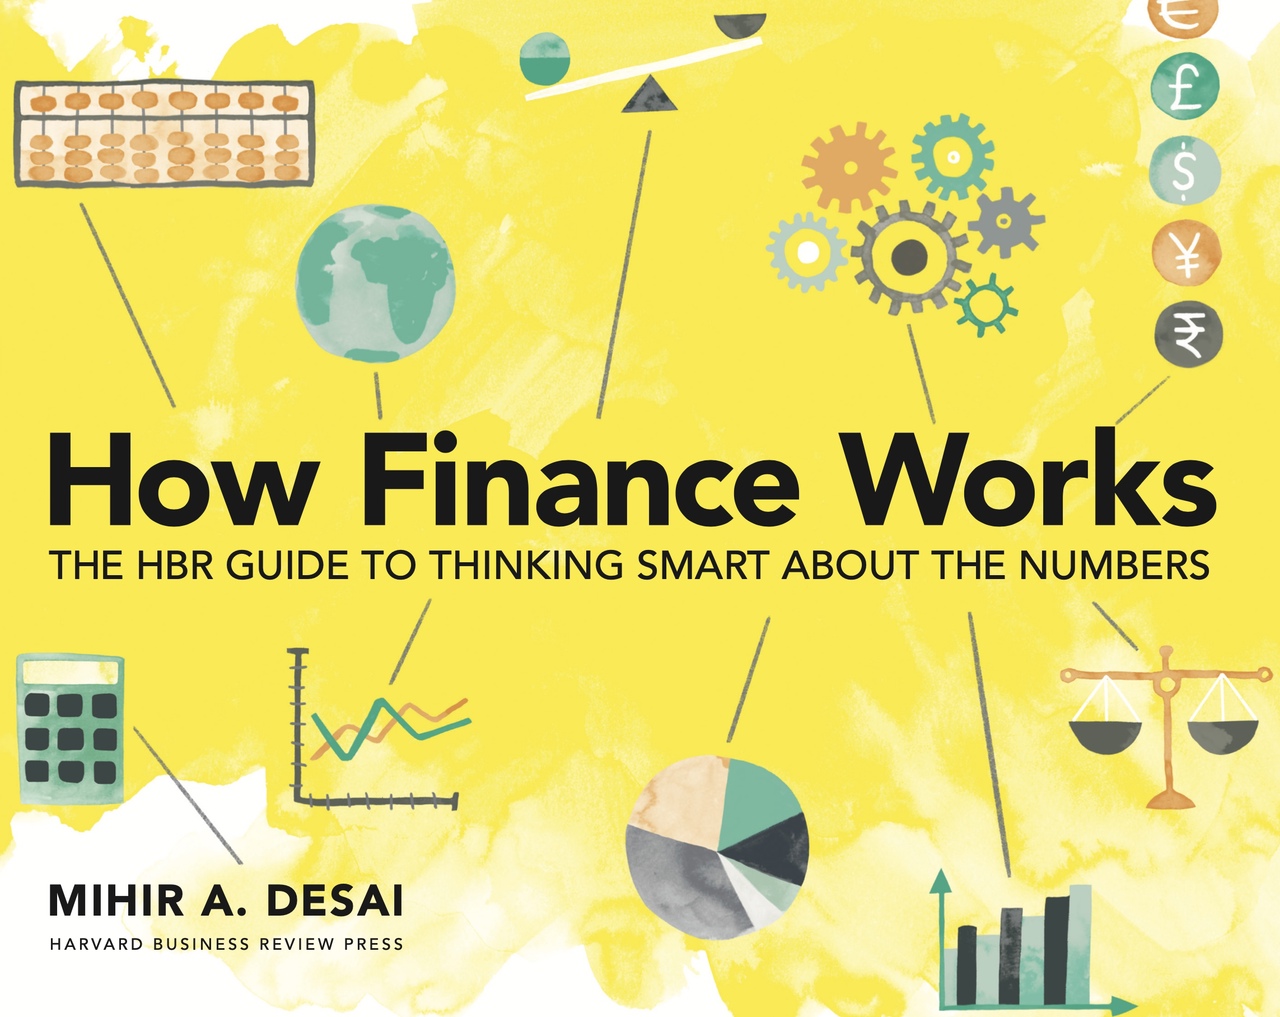 How Finance Works: The HBR Guide To Thinking Smart About The Numbers (Desai, 2019)